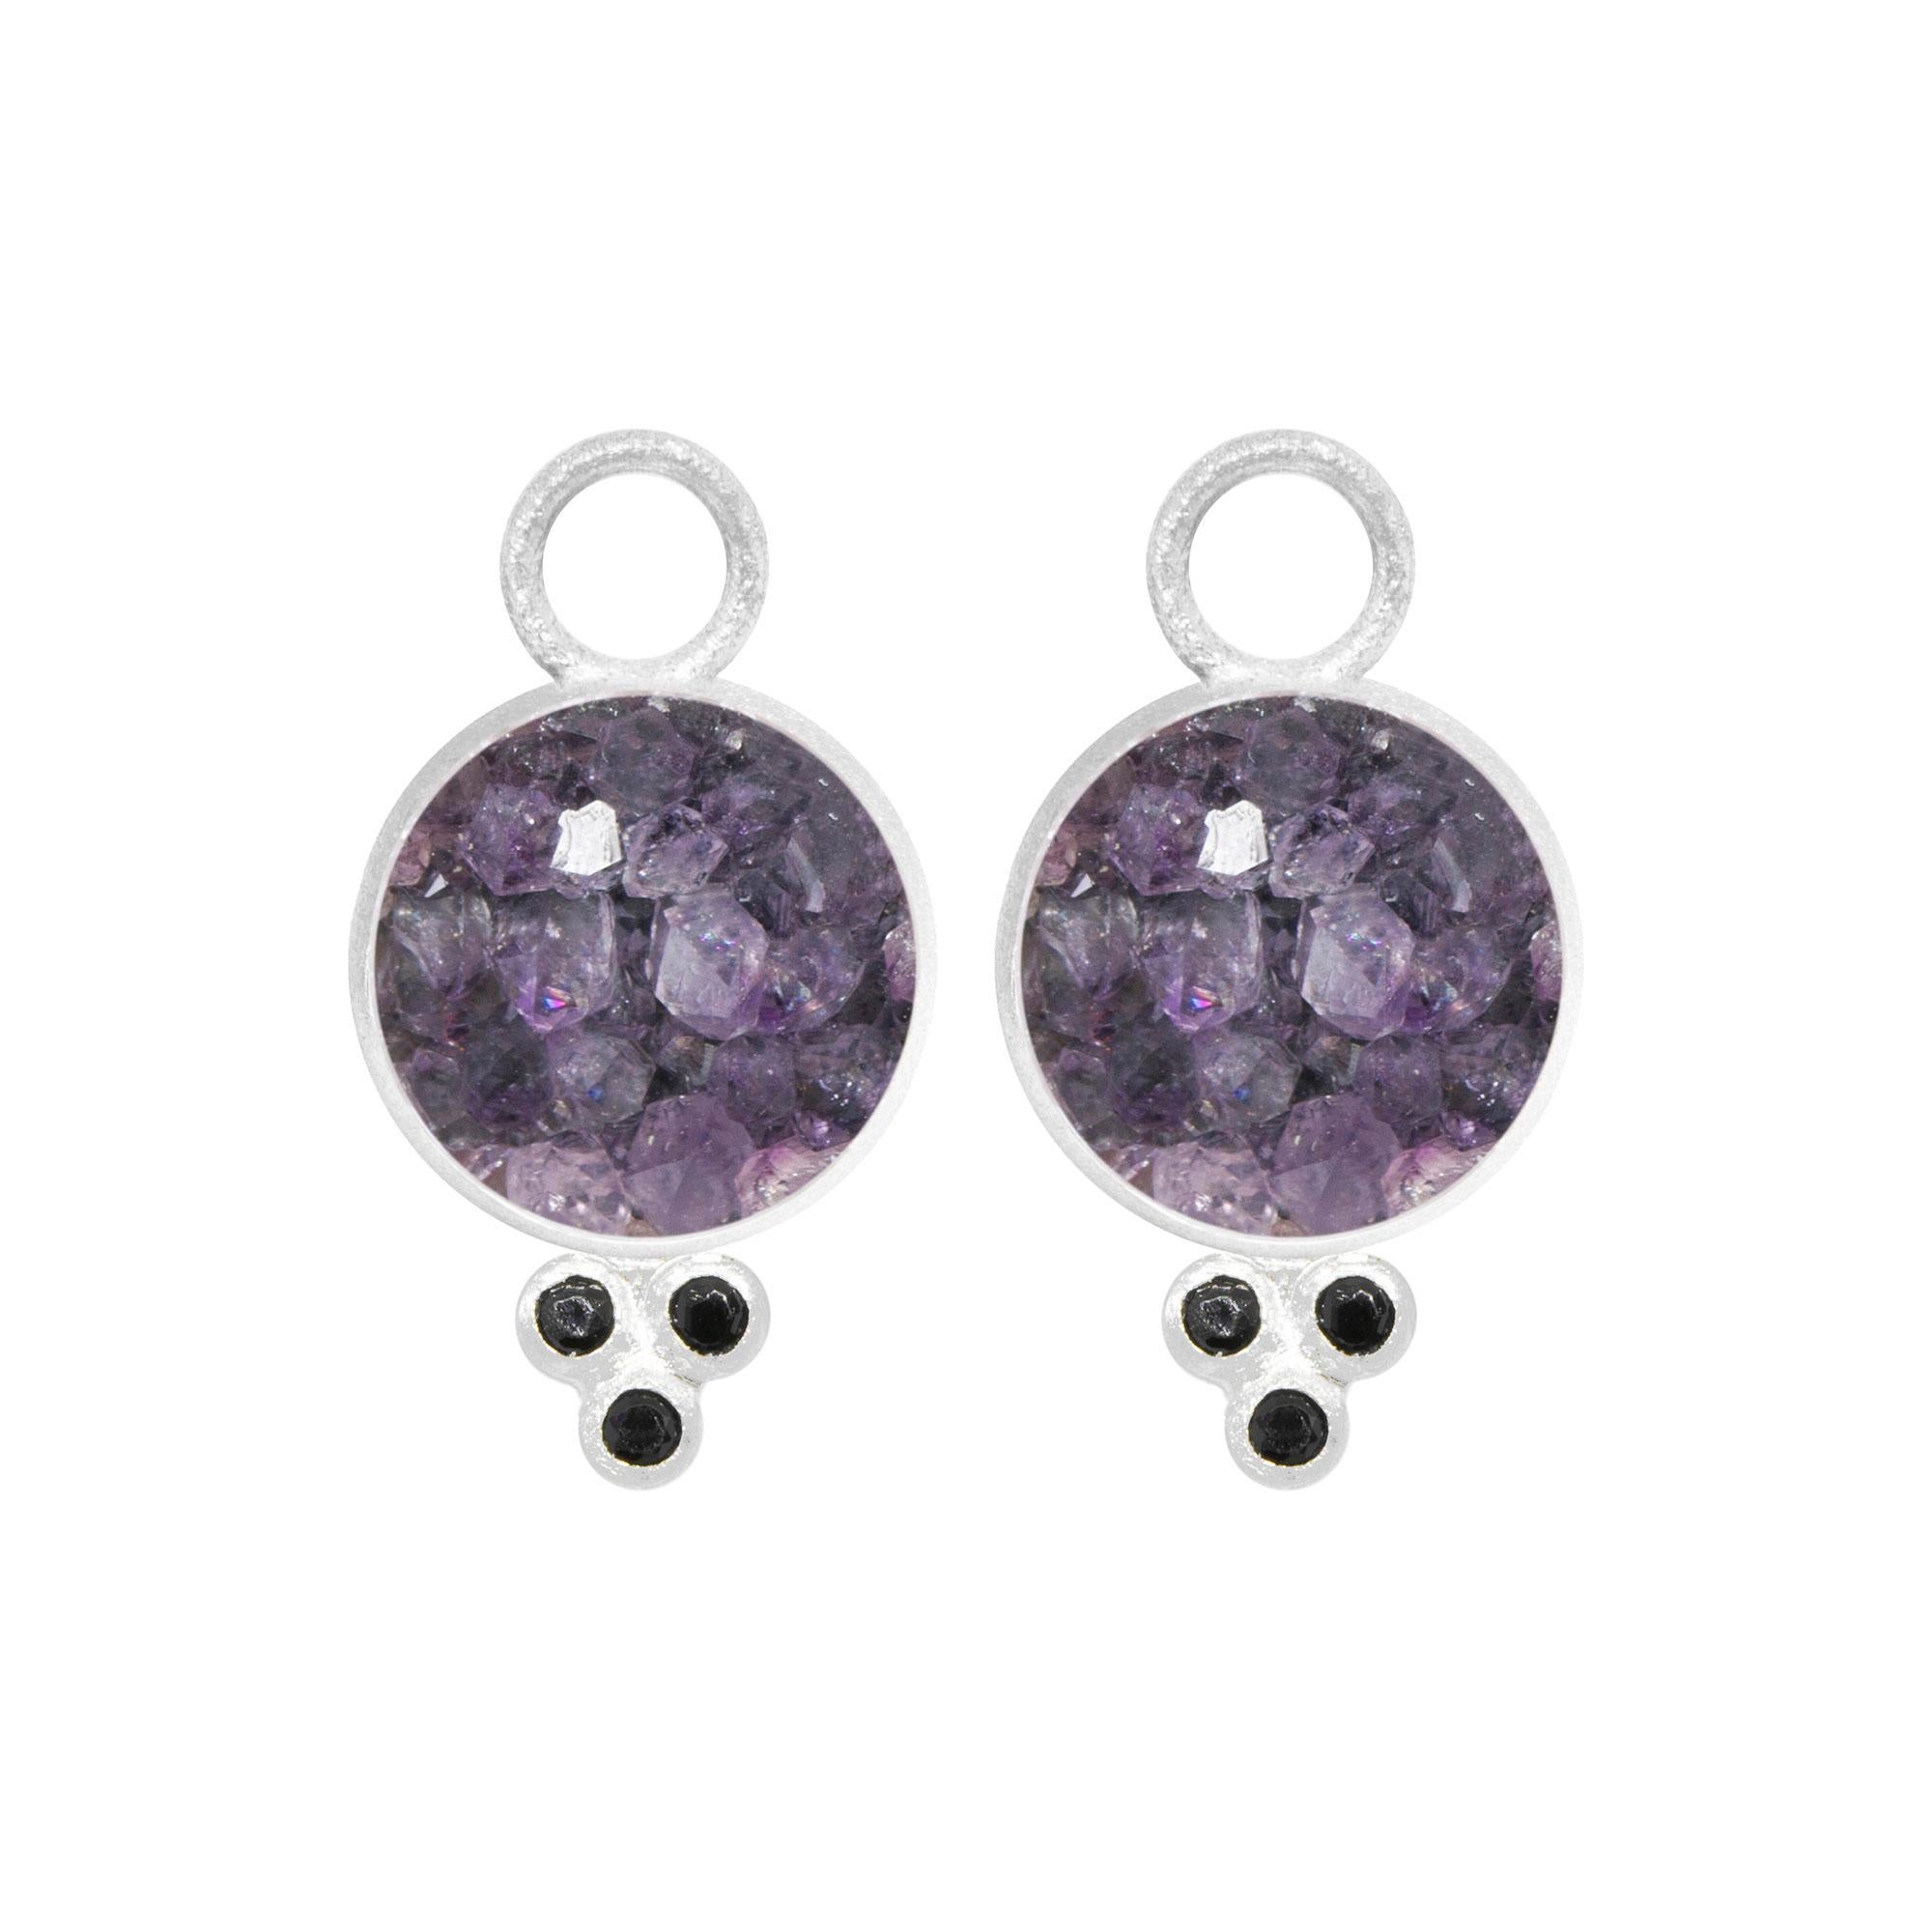 Mekong Med Labradorite and Chloe Amethyst Druzy Silver Earrings In New Condition For Sale In Denver, CO